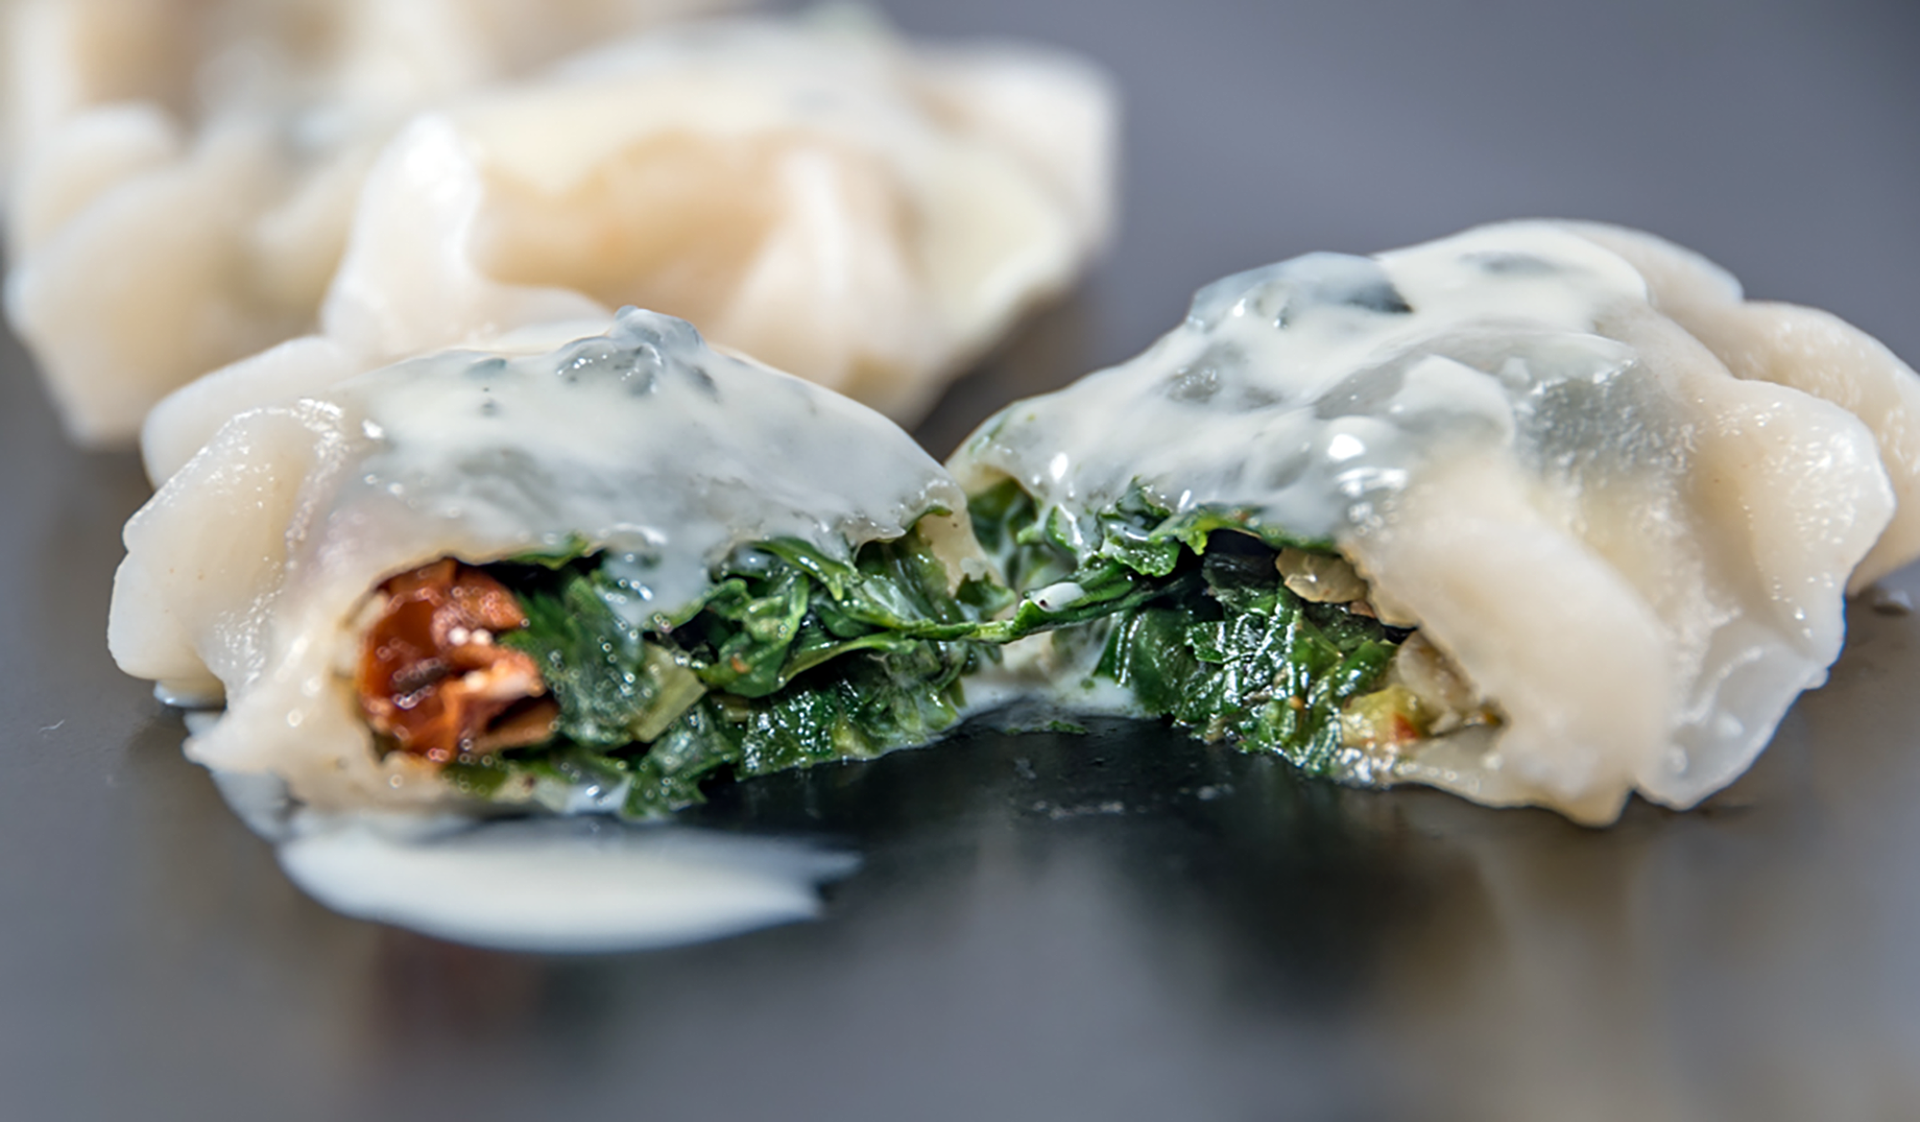 Dumplings with spinach, sun-dried tomatoes and Grikios salad cheese